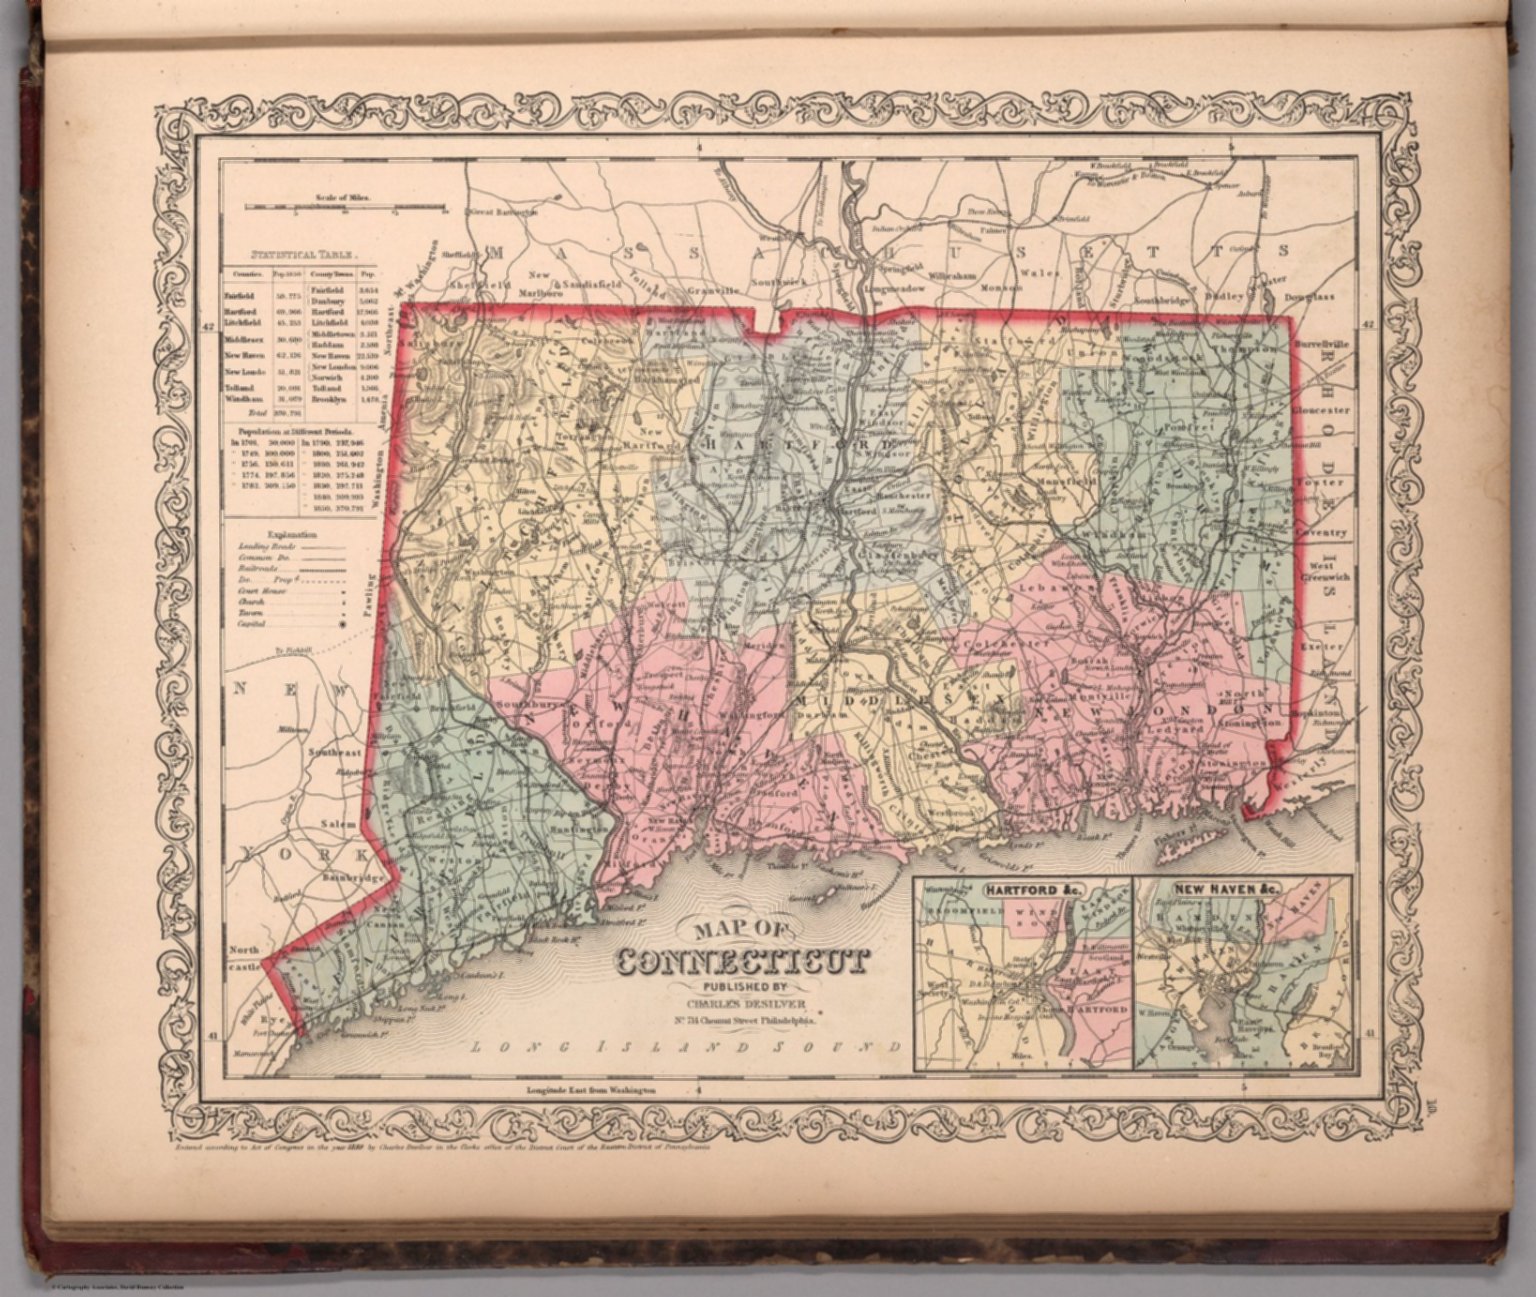 Map Of Connecticut Published By Charles Desilver David Rumsey Historical Map Collection